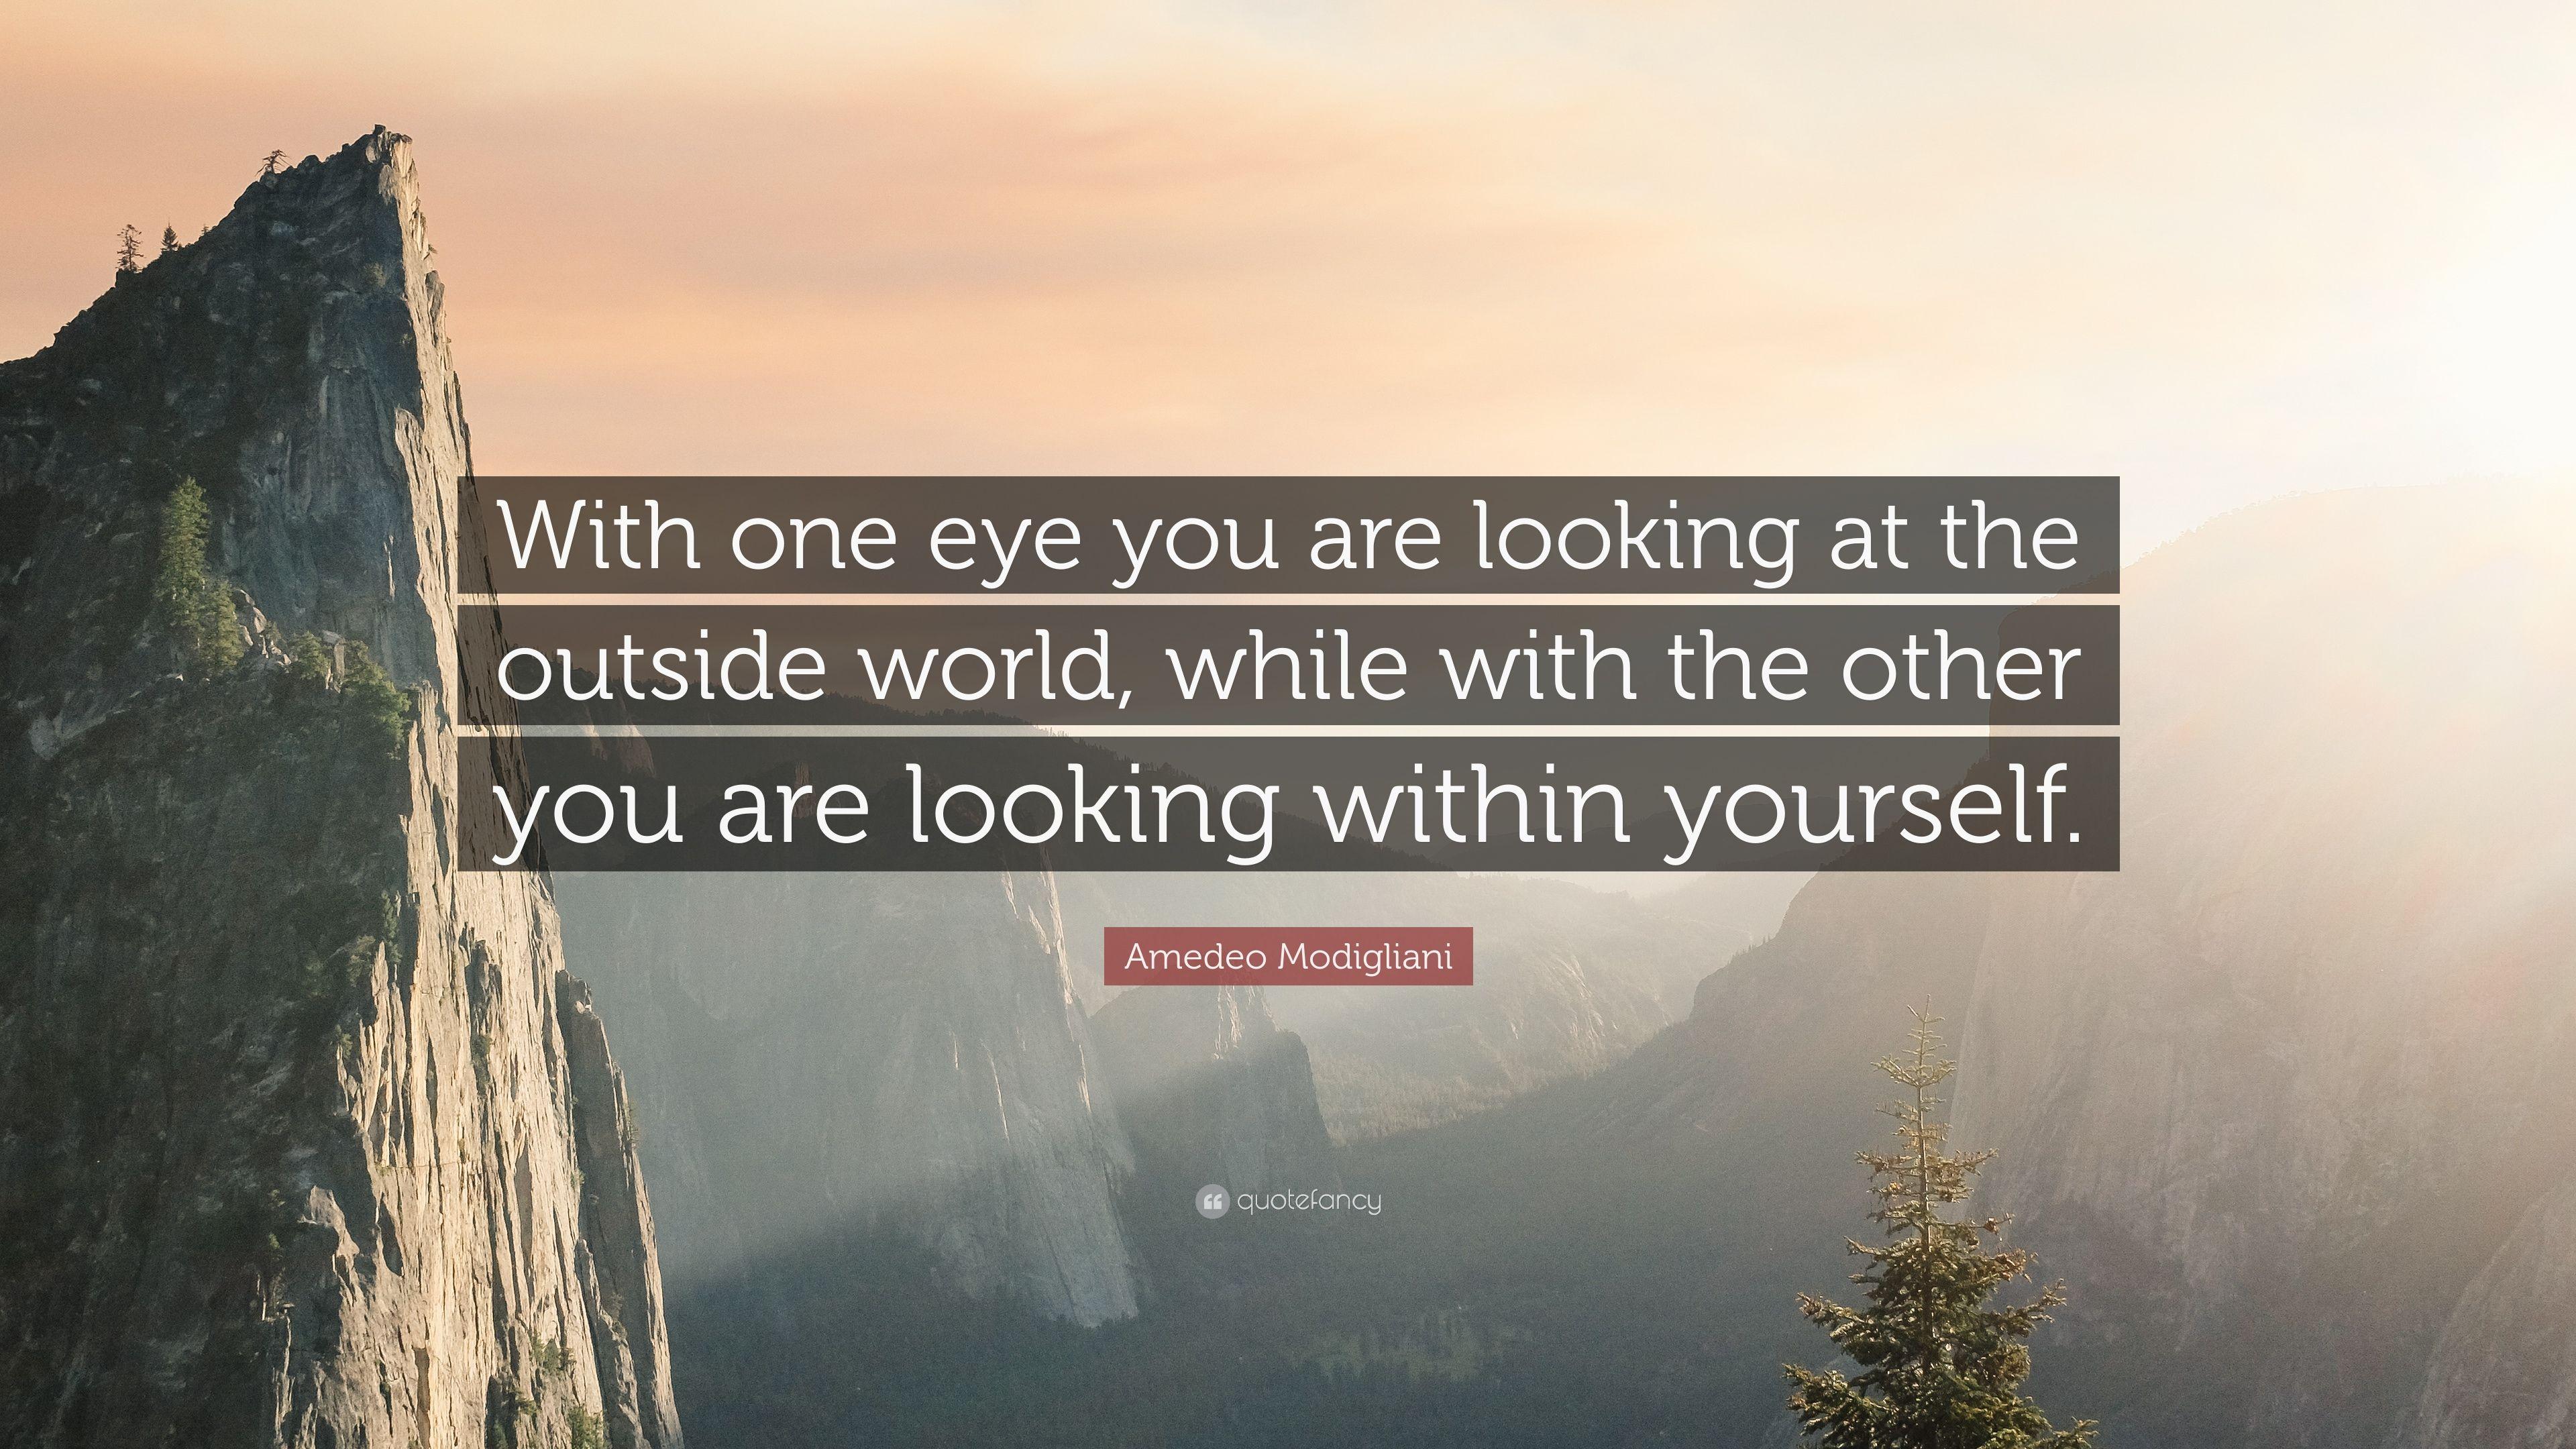 Amedeo Modigliani Quote: “With one eye you are looking